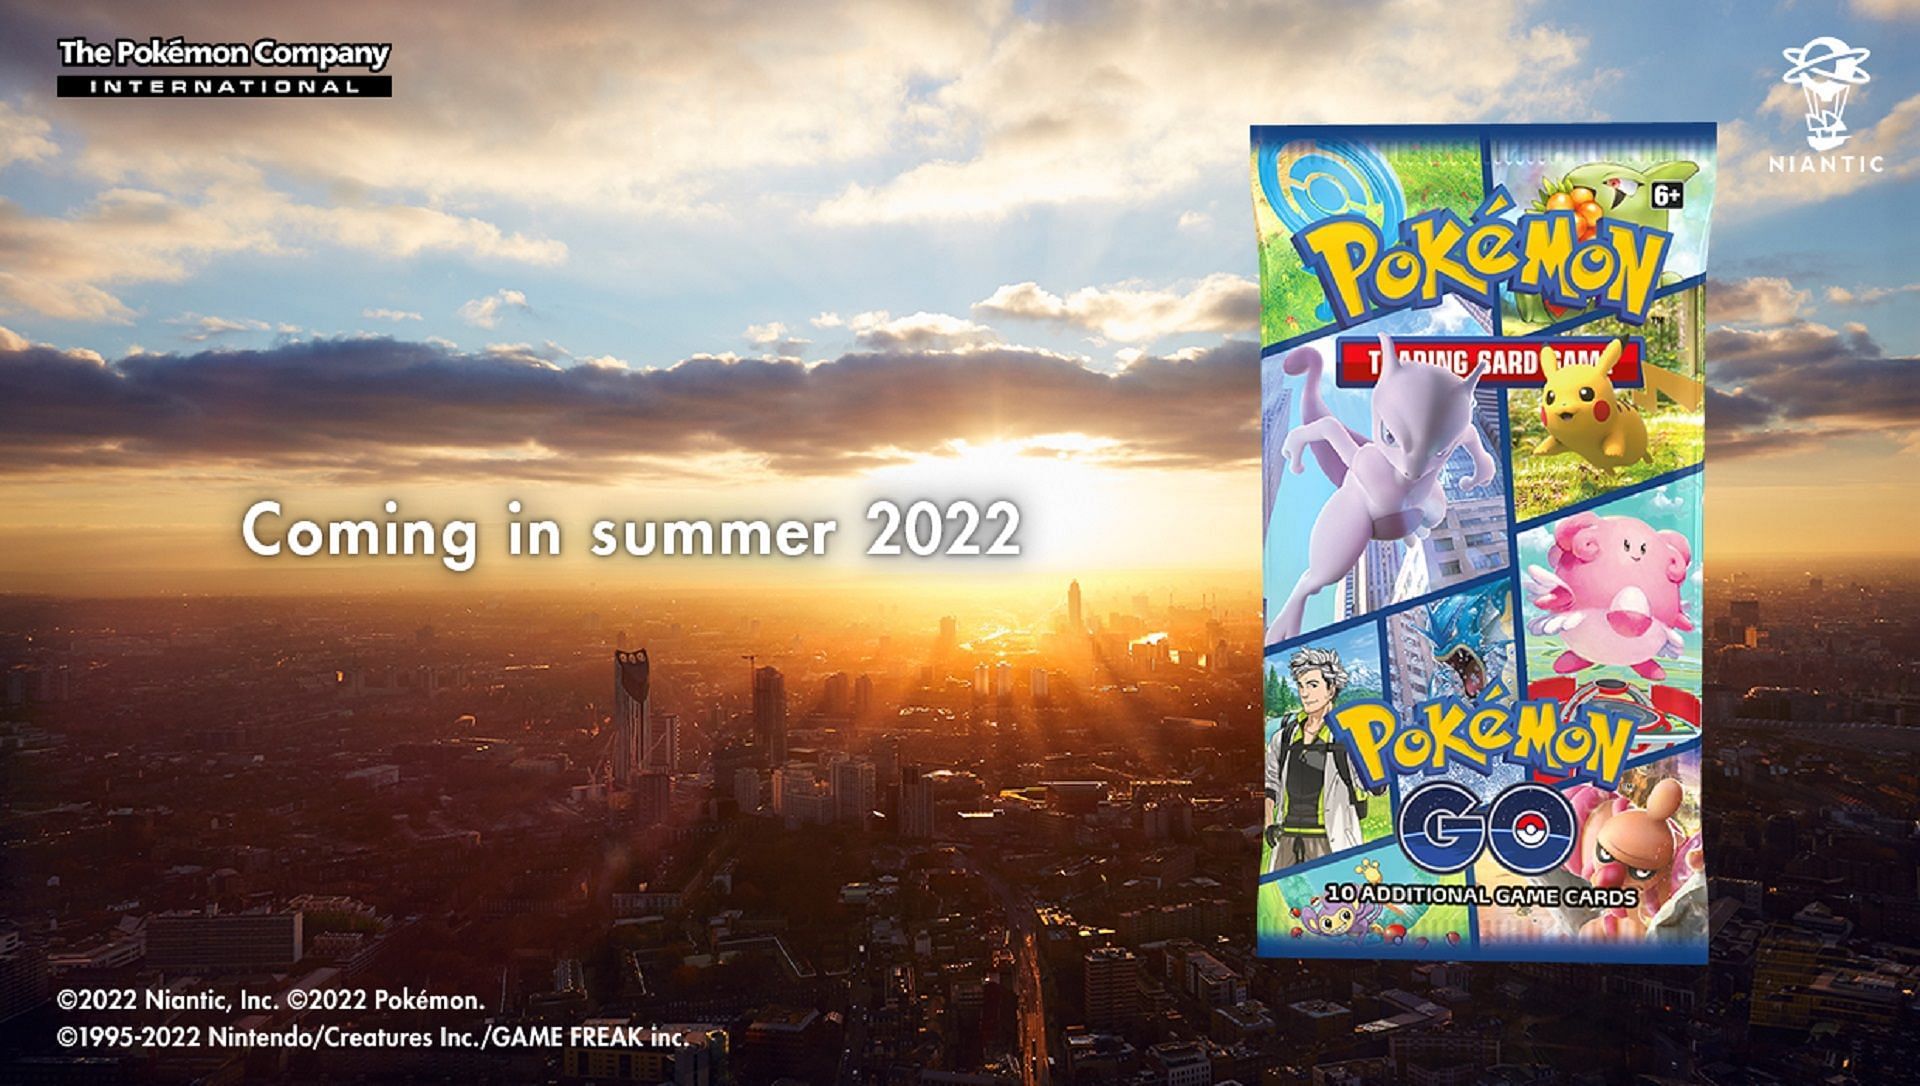 The official release announcement for the collaboration via Niantic (Image via Niantic/The Pokemon Company)